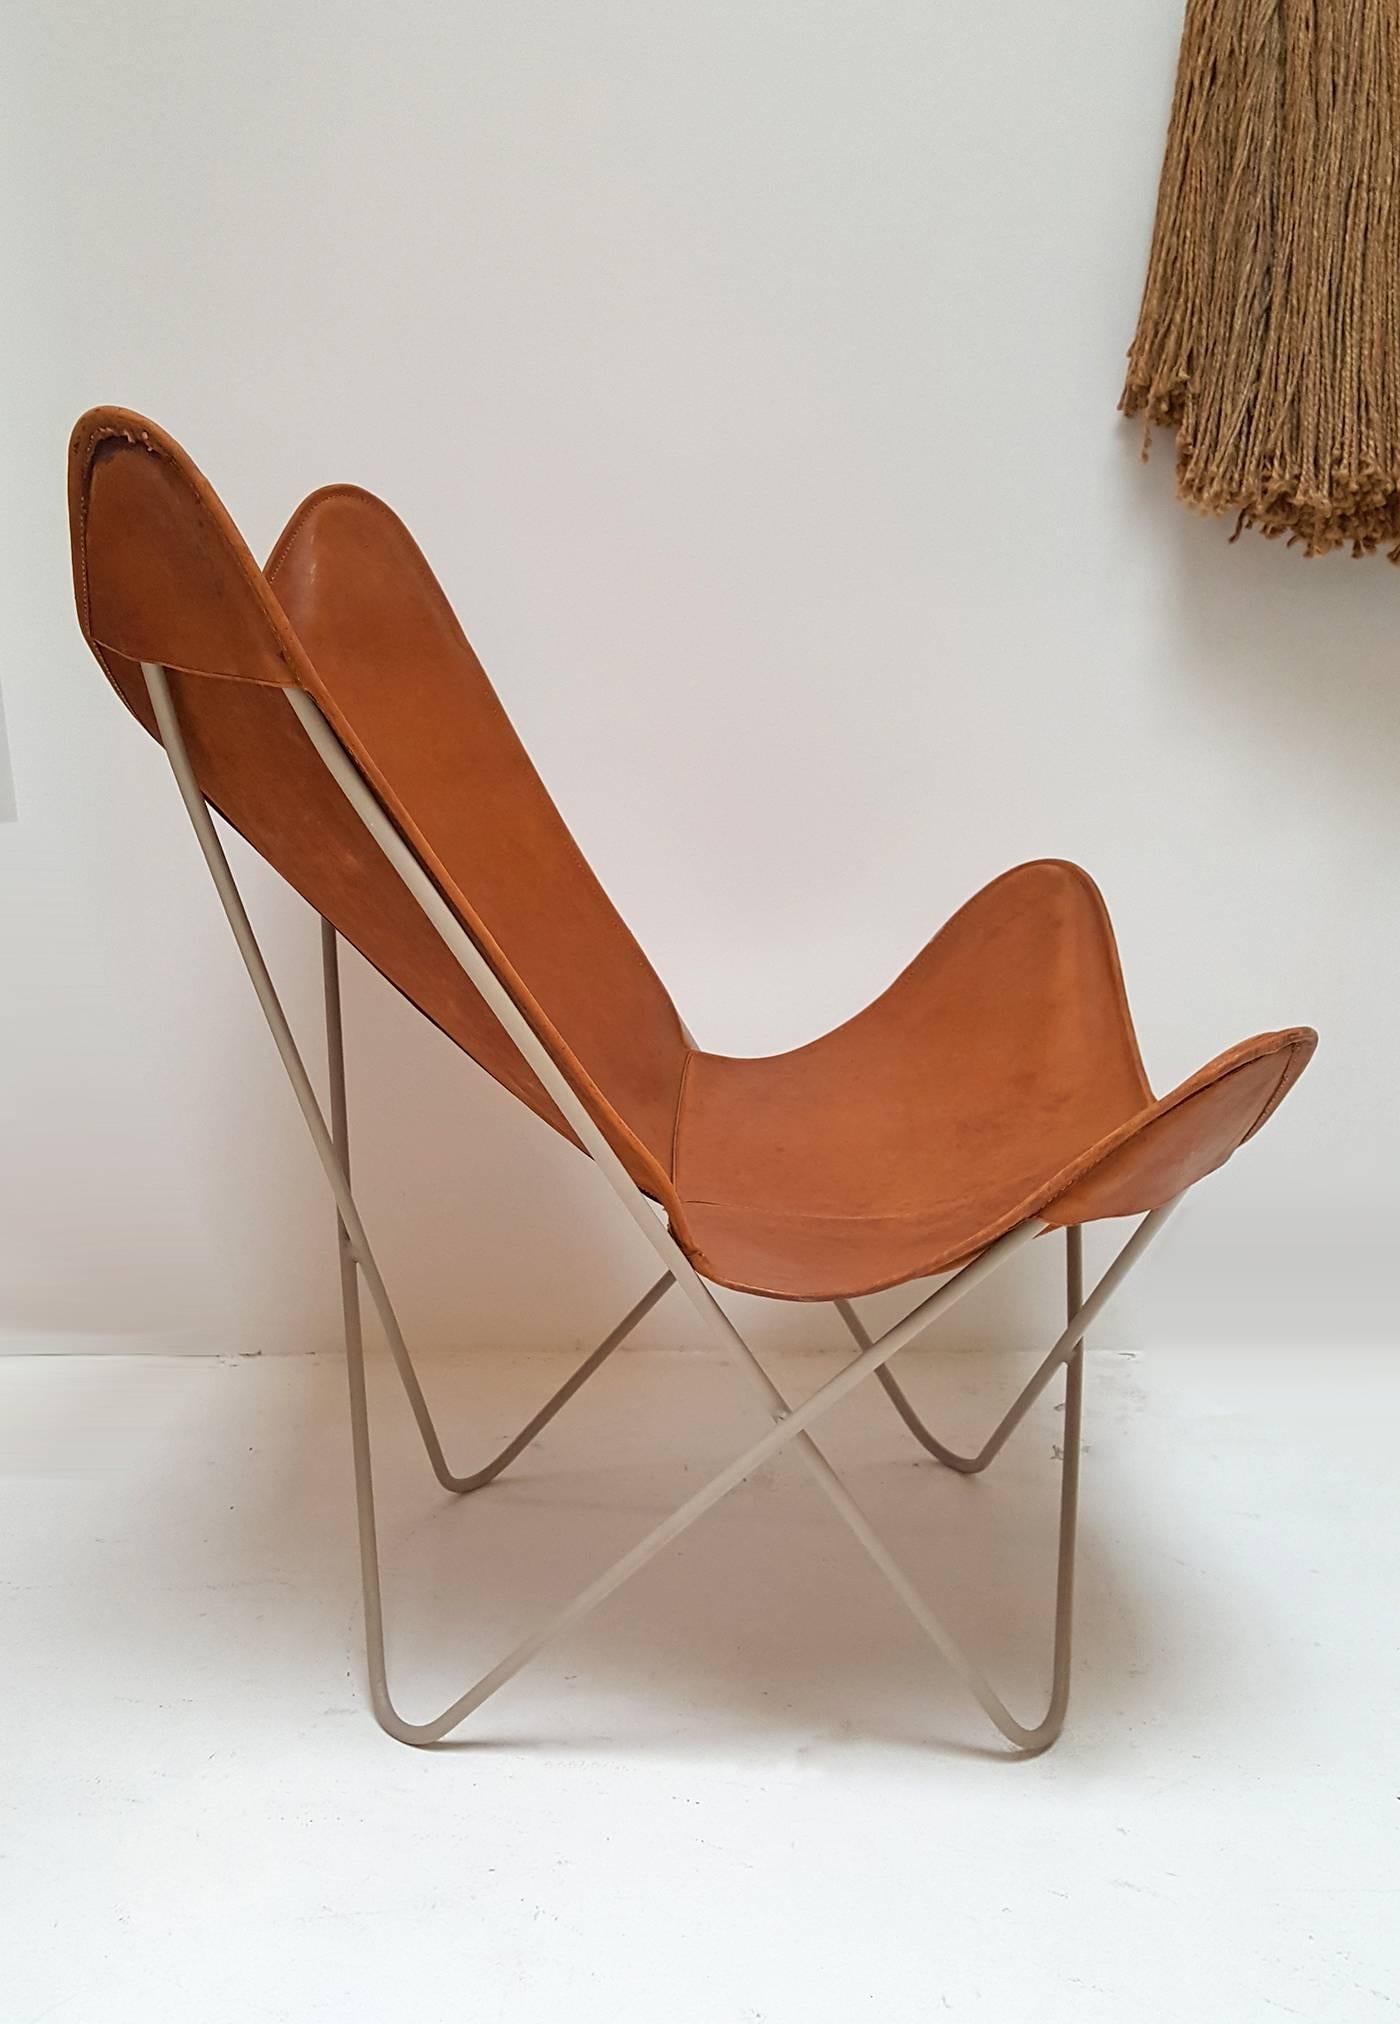 Mid-Century Modern Knoll Hardoy Butterfly Sling Chairs 1954 brown leather